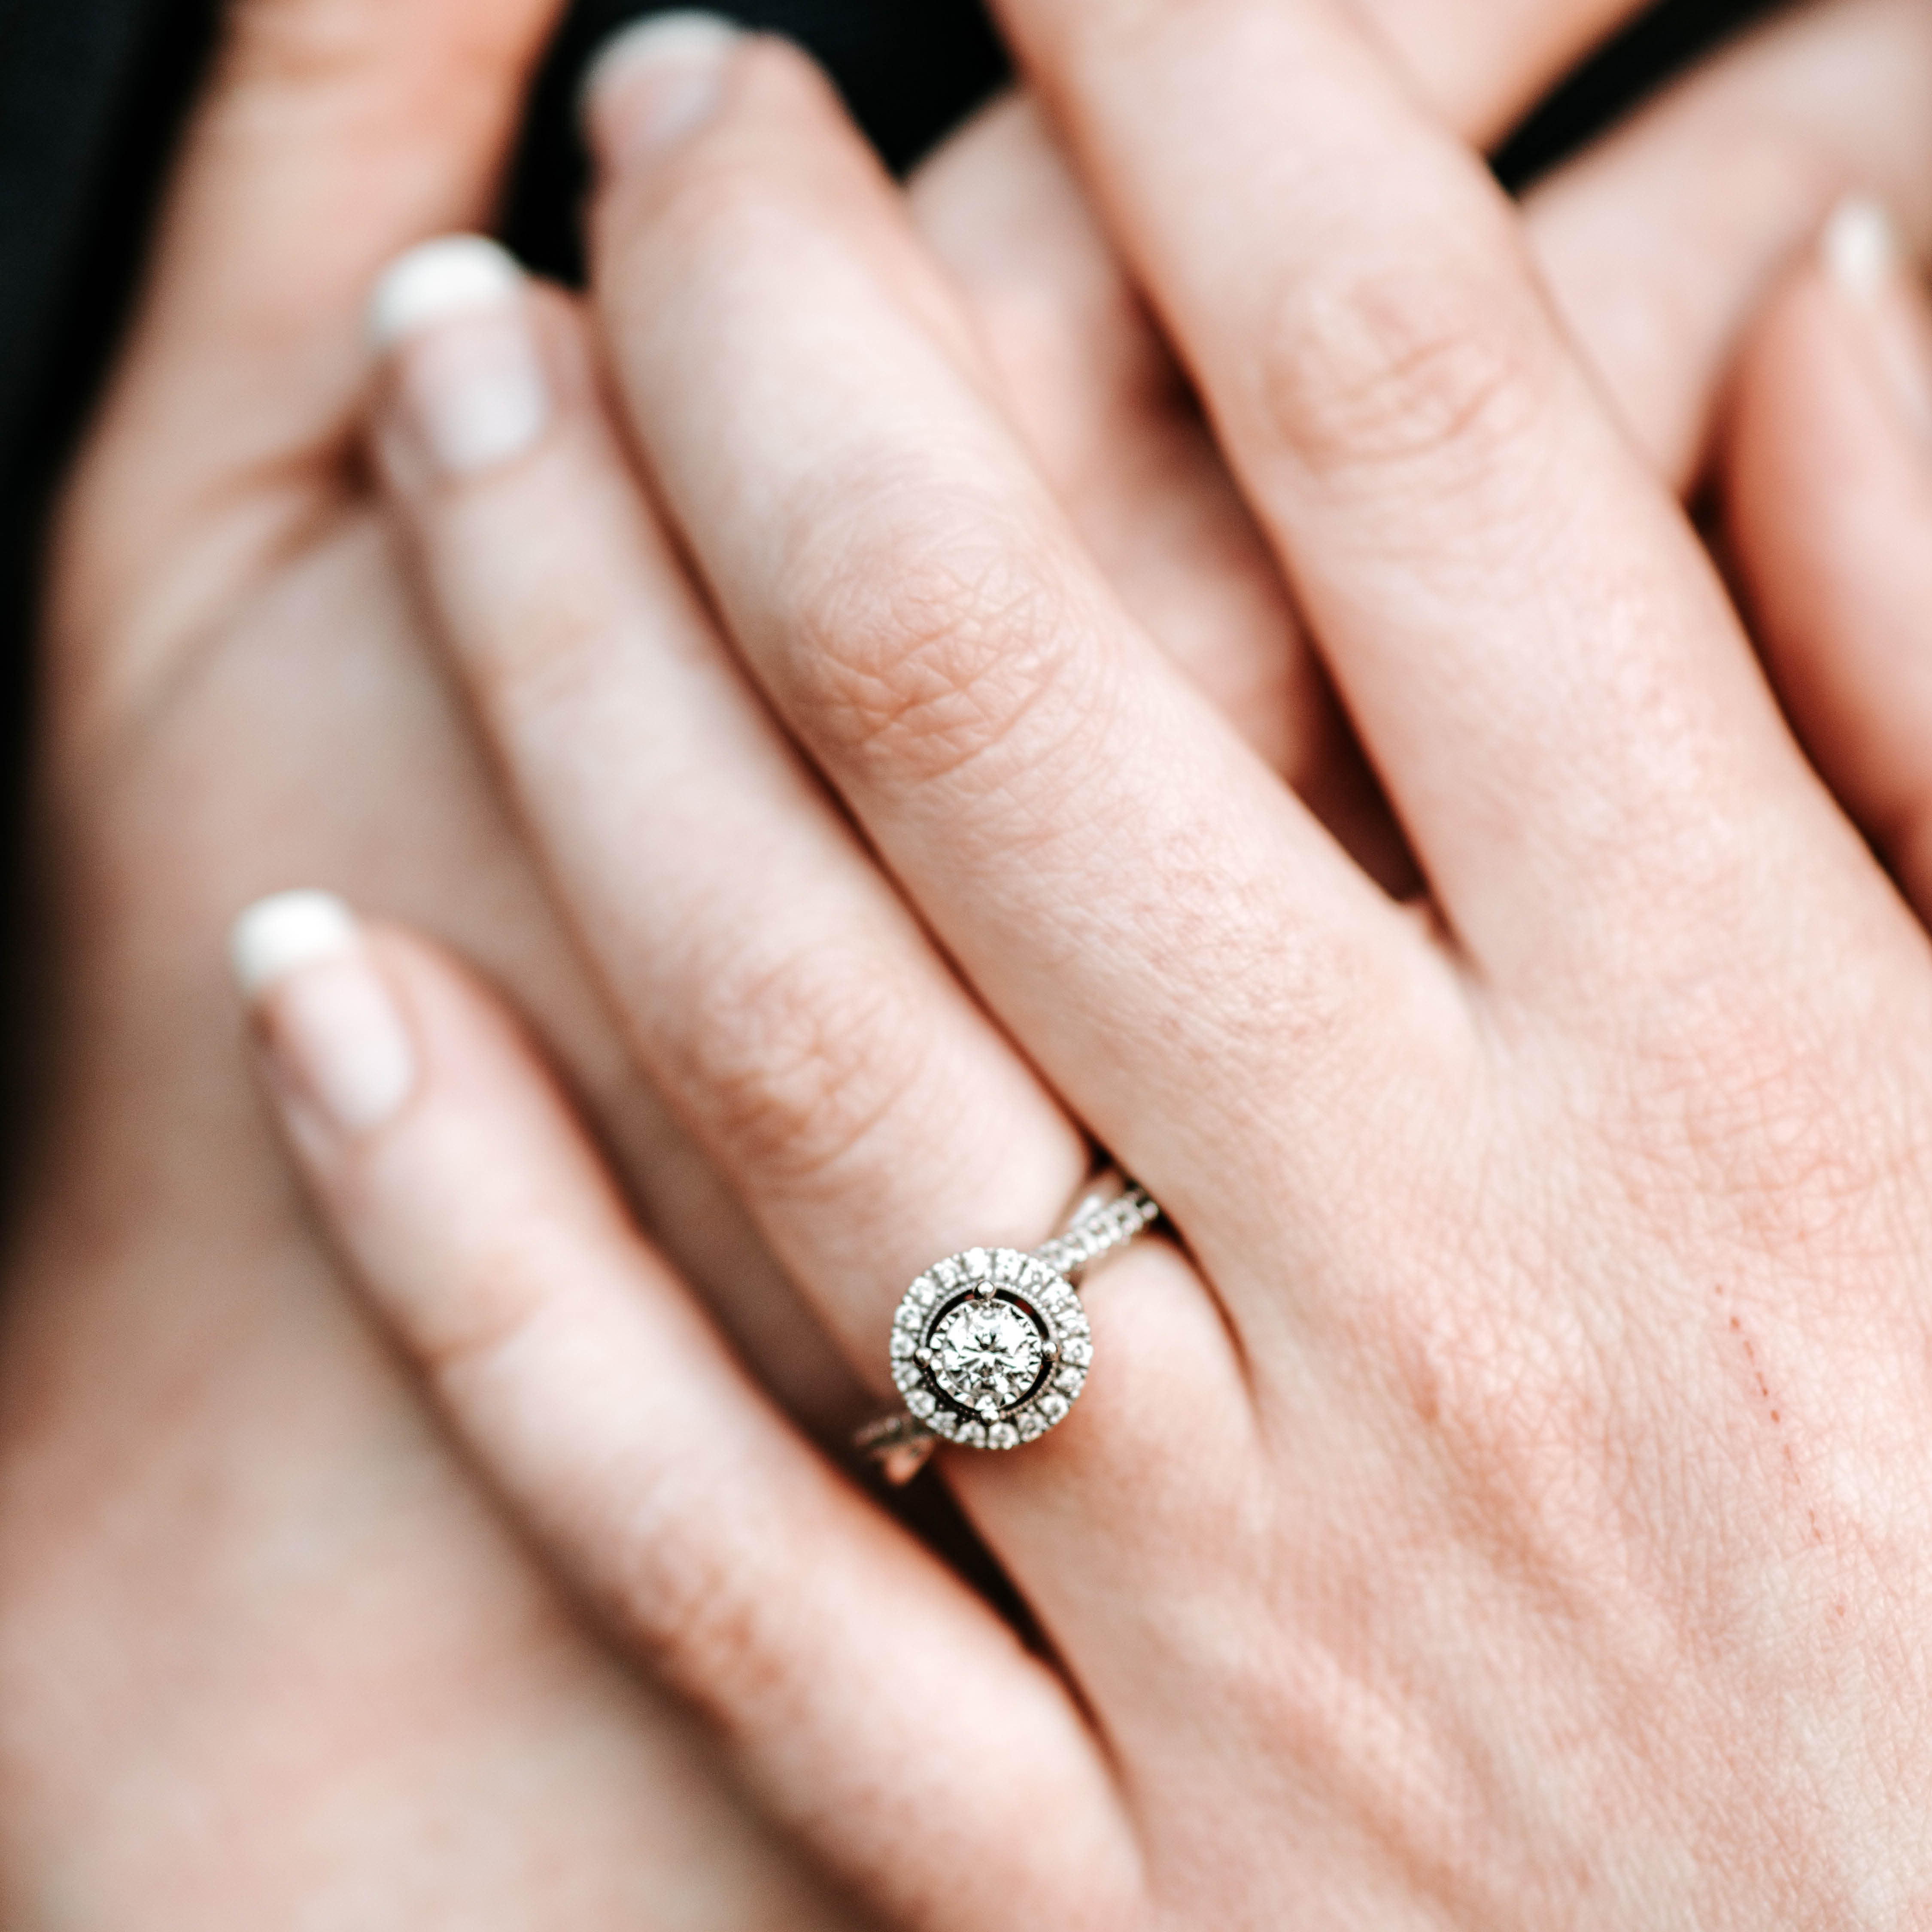 Top Tips Looking After your Engagement Ring, engagement ring integrity